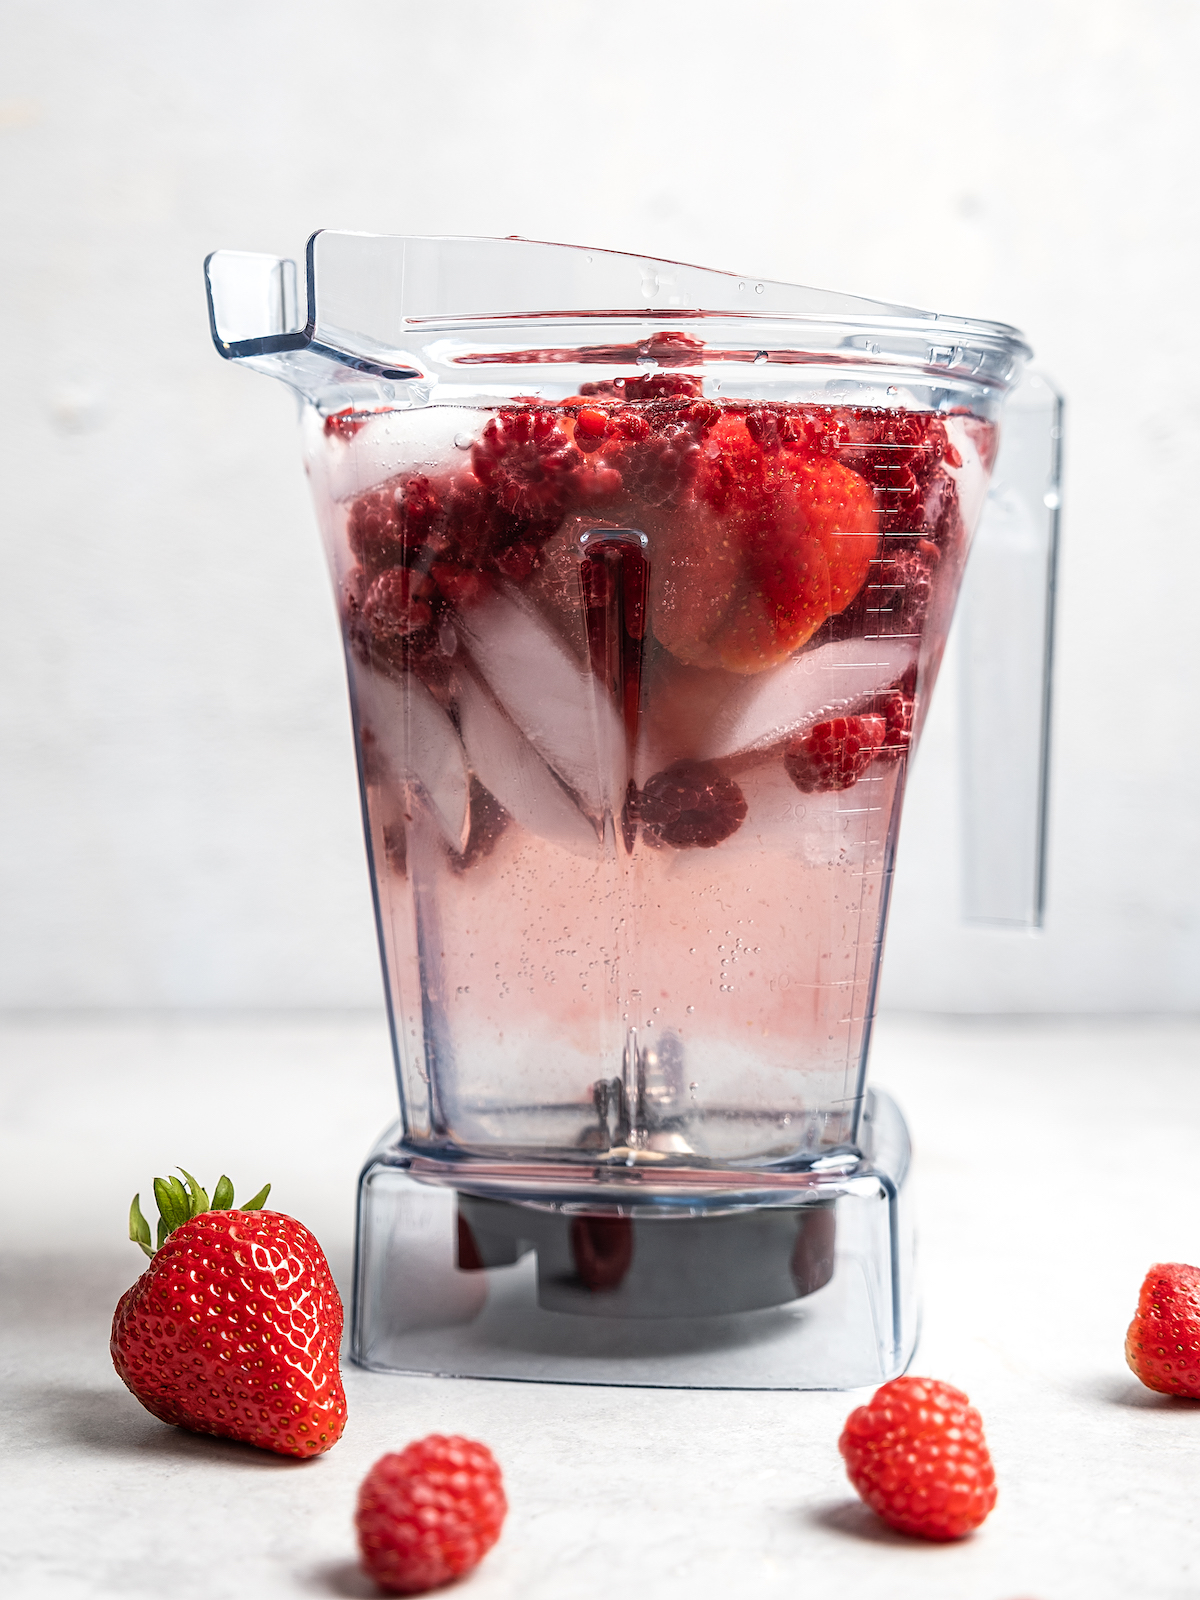 Berries, ice, white claw and captain morgan in a blender.